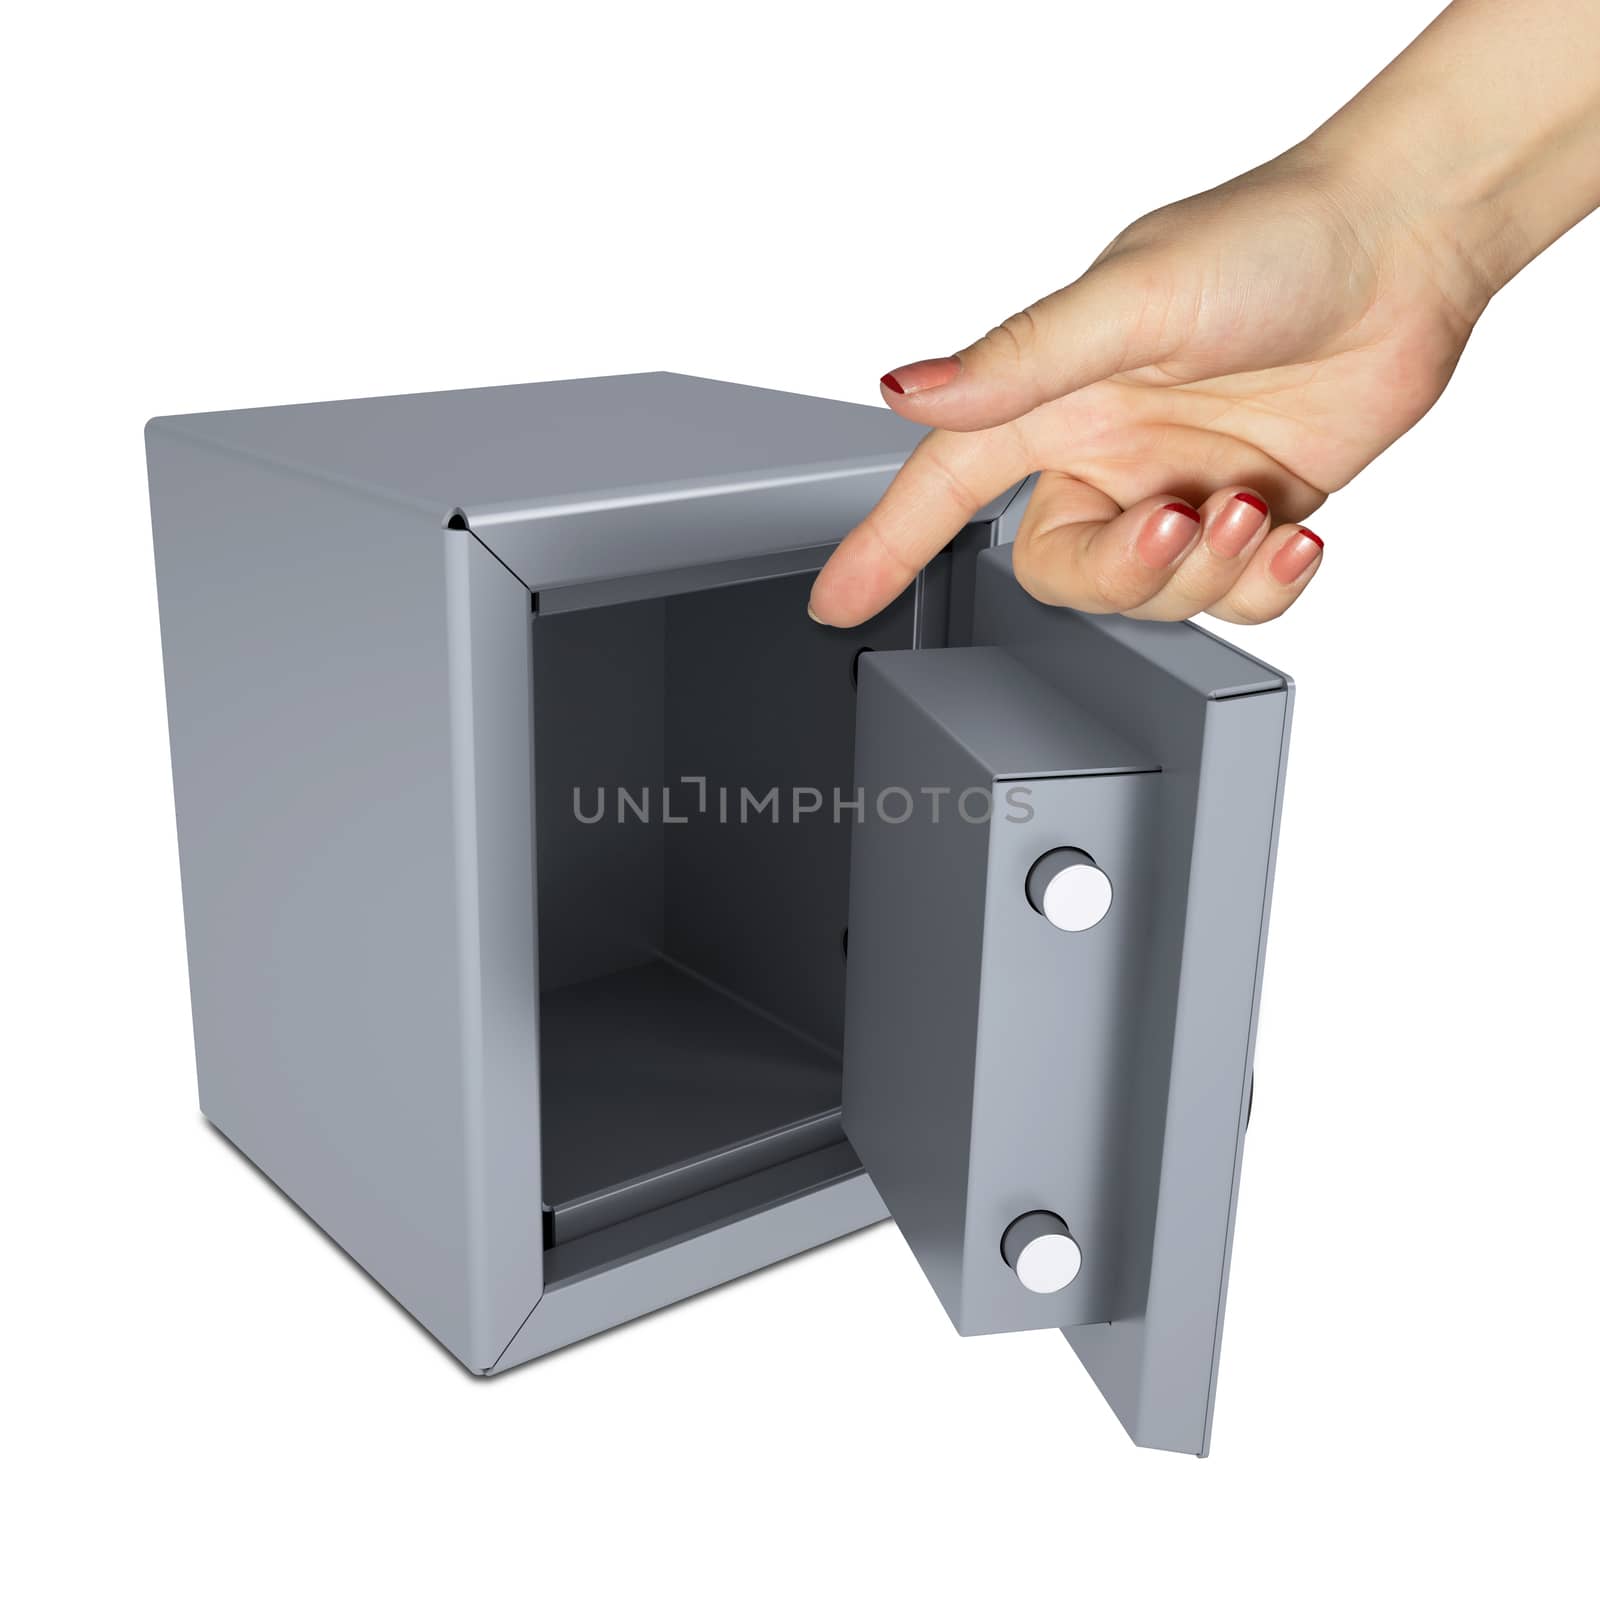 Hand pointing to the open safe by cherezoff